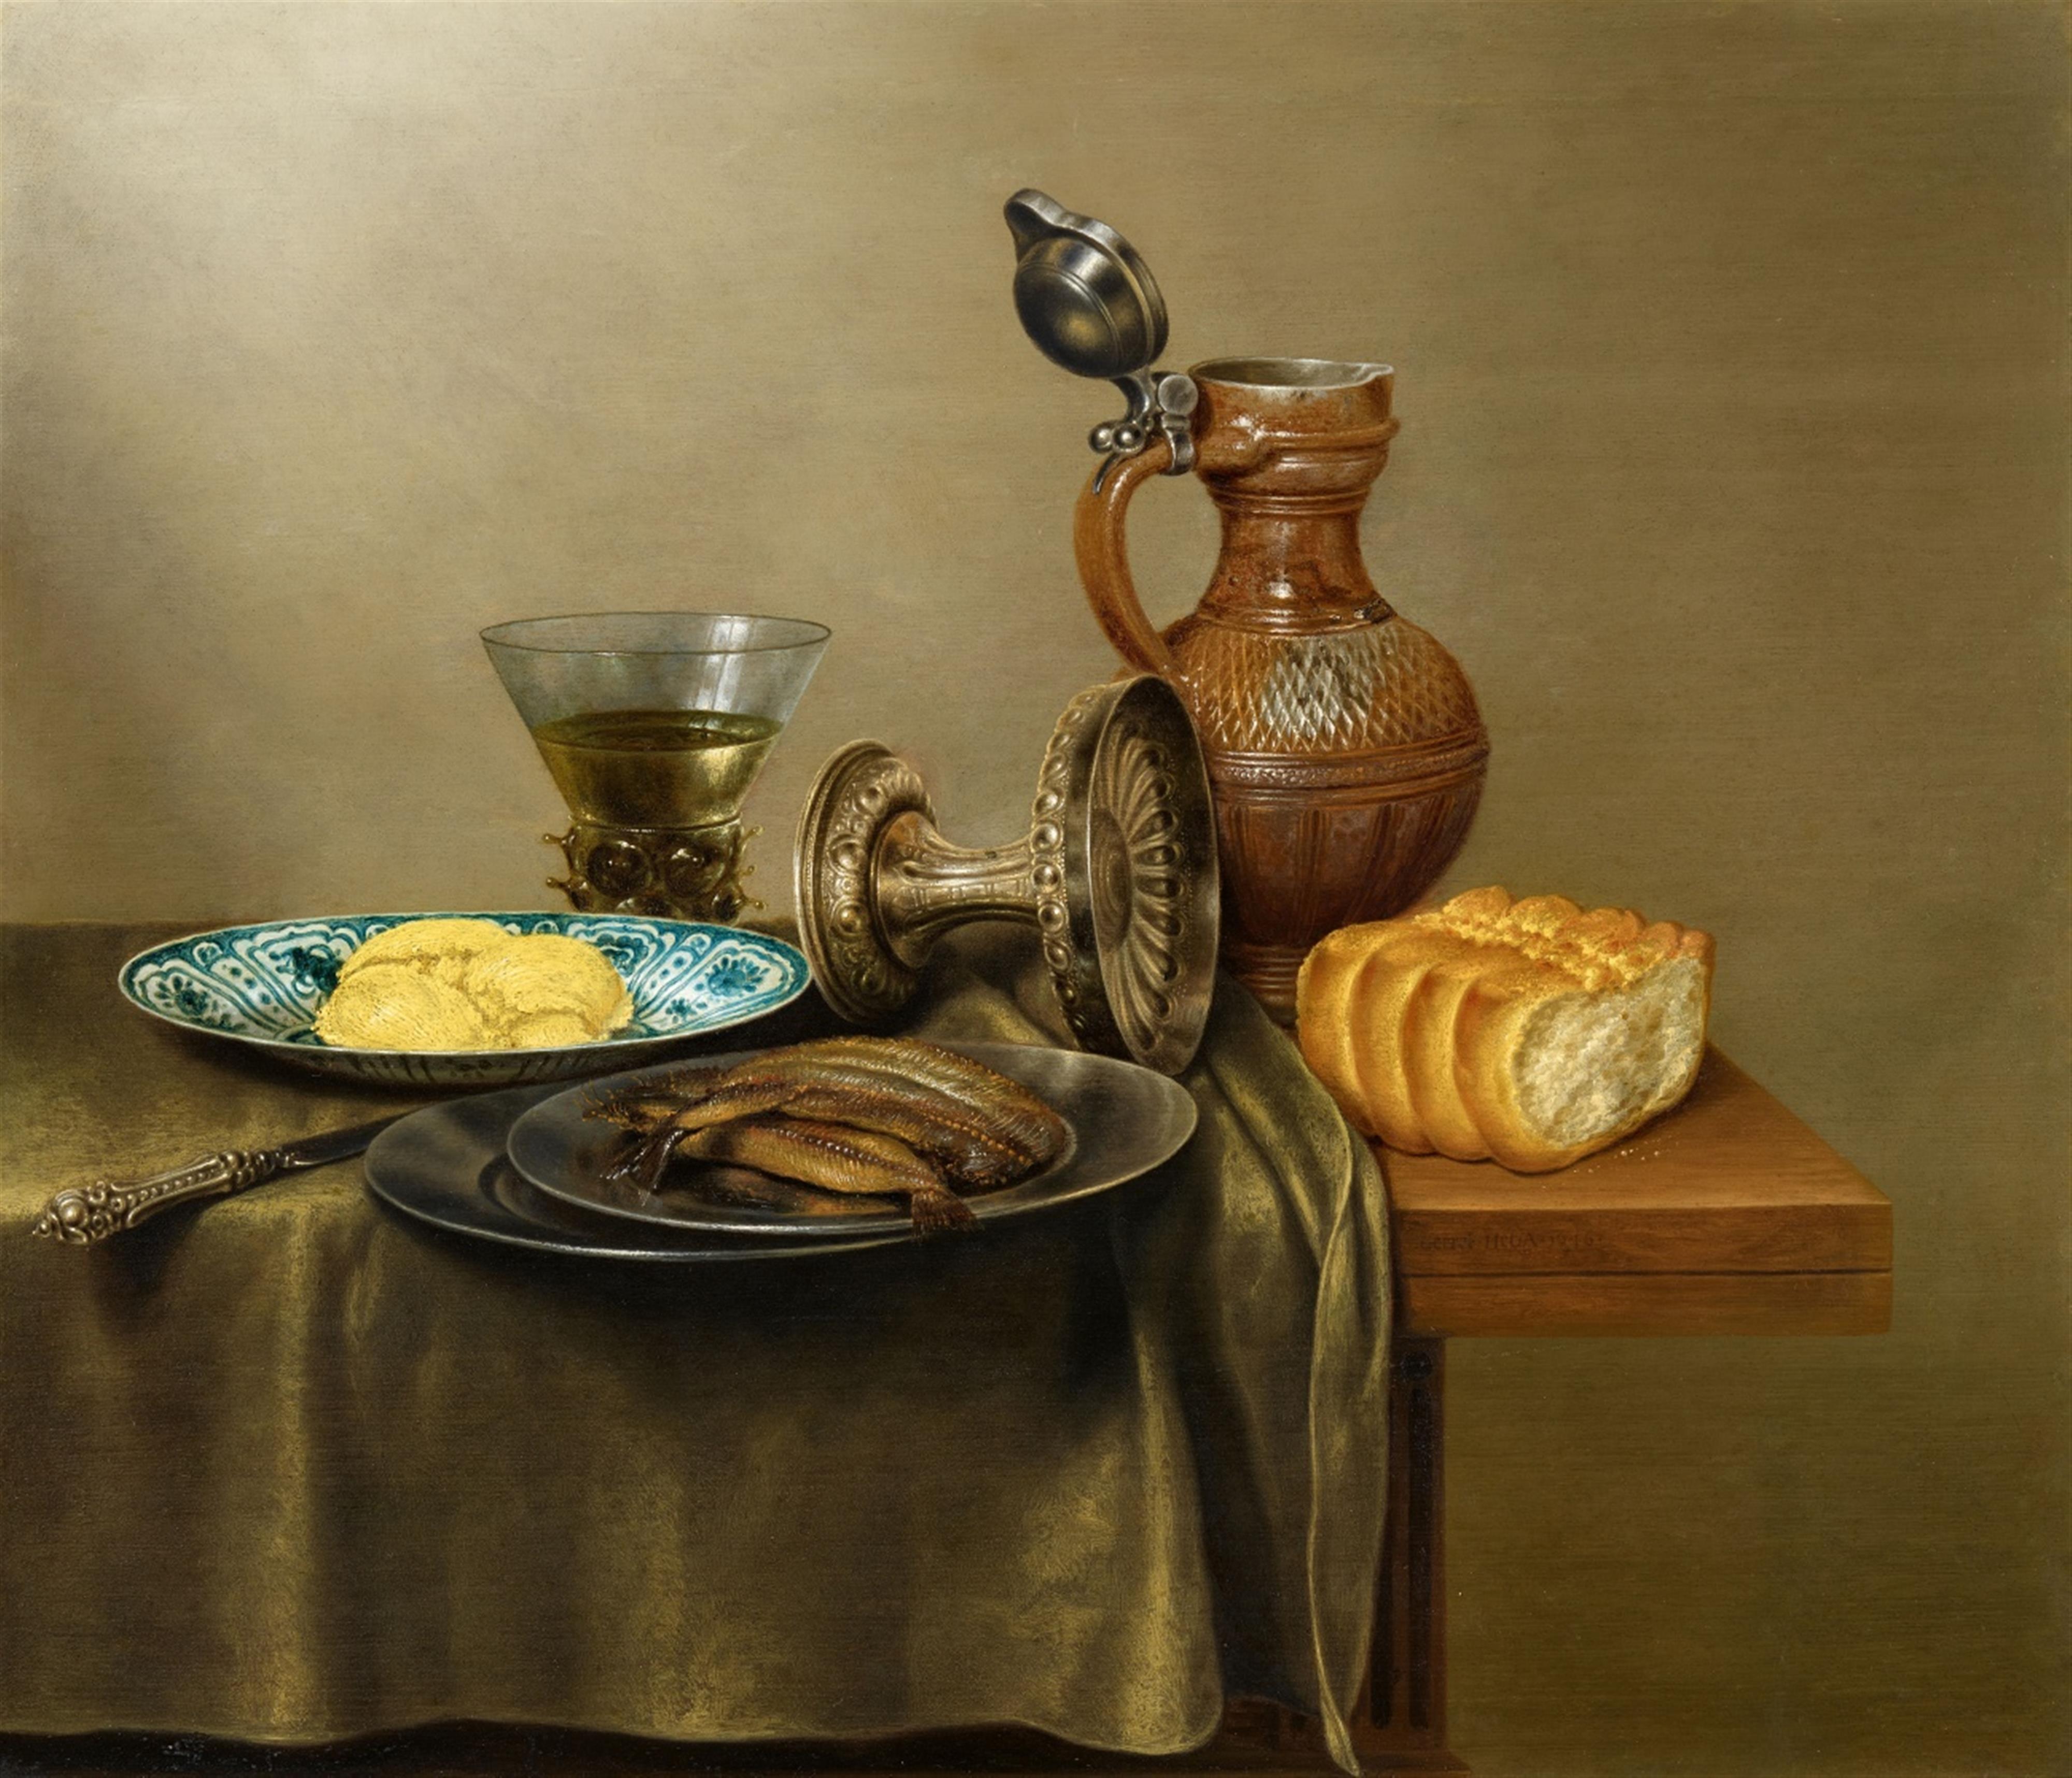 Gerret Willemsz. Heda - Still Life with a Herring, Rummer, Wanli Dish, and Bread - image-1